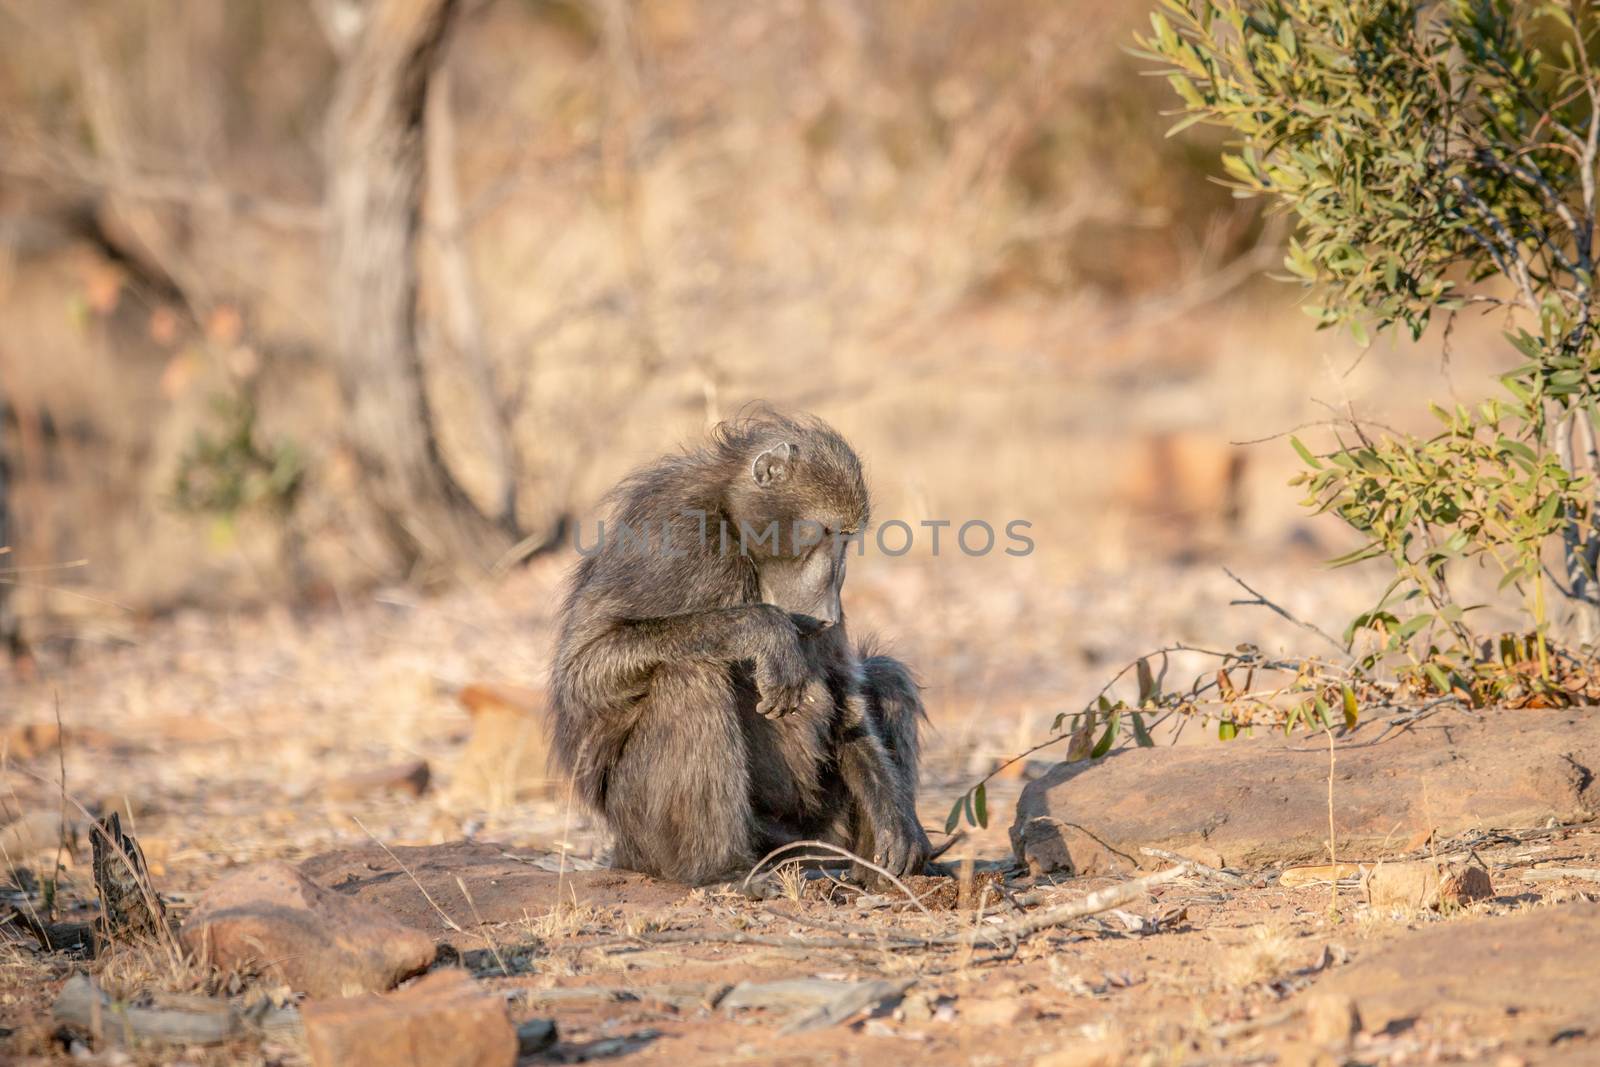 Chacma baboon sitting and eating in the grass. by Simoneemanphotography